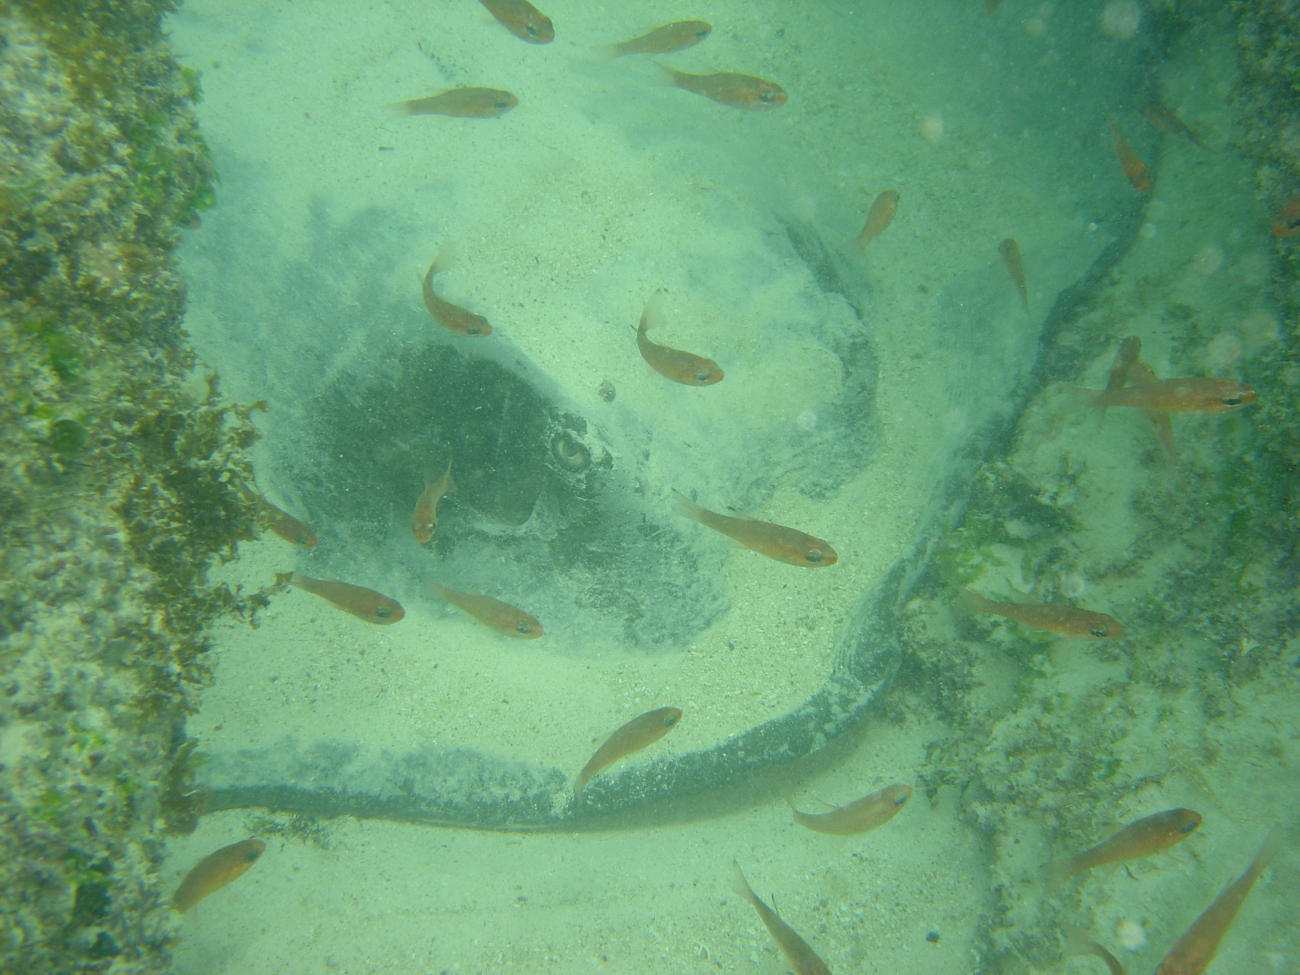 Stingray in shallow water